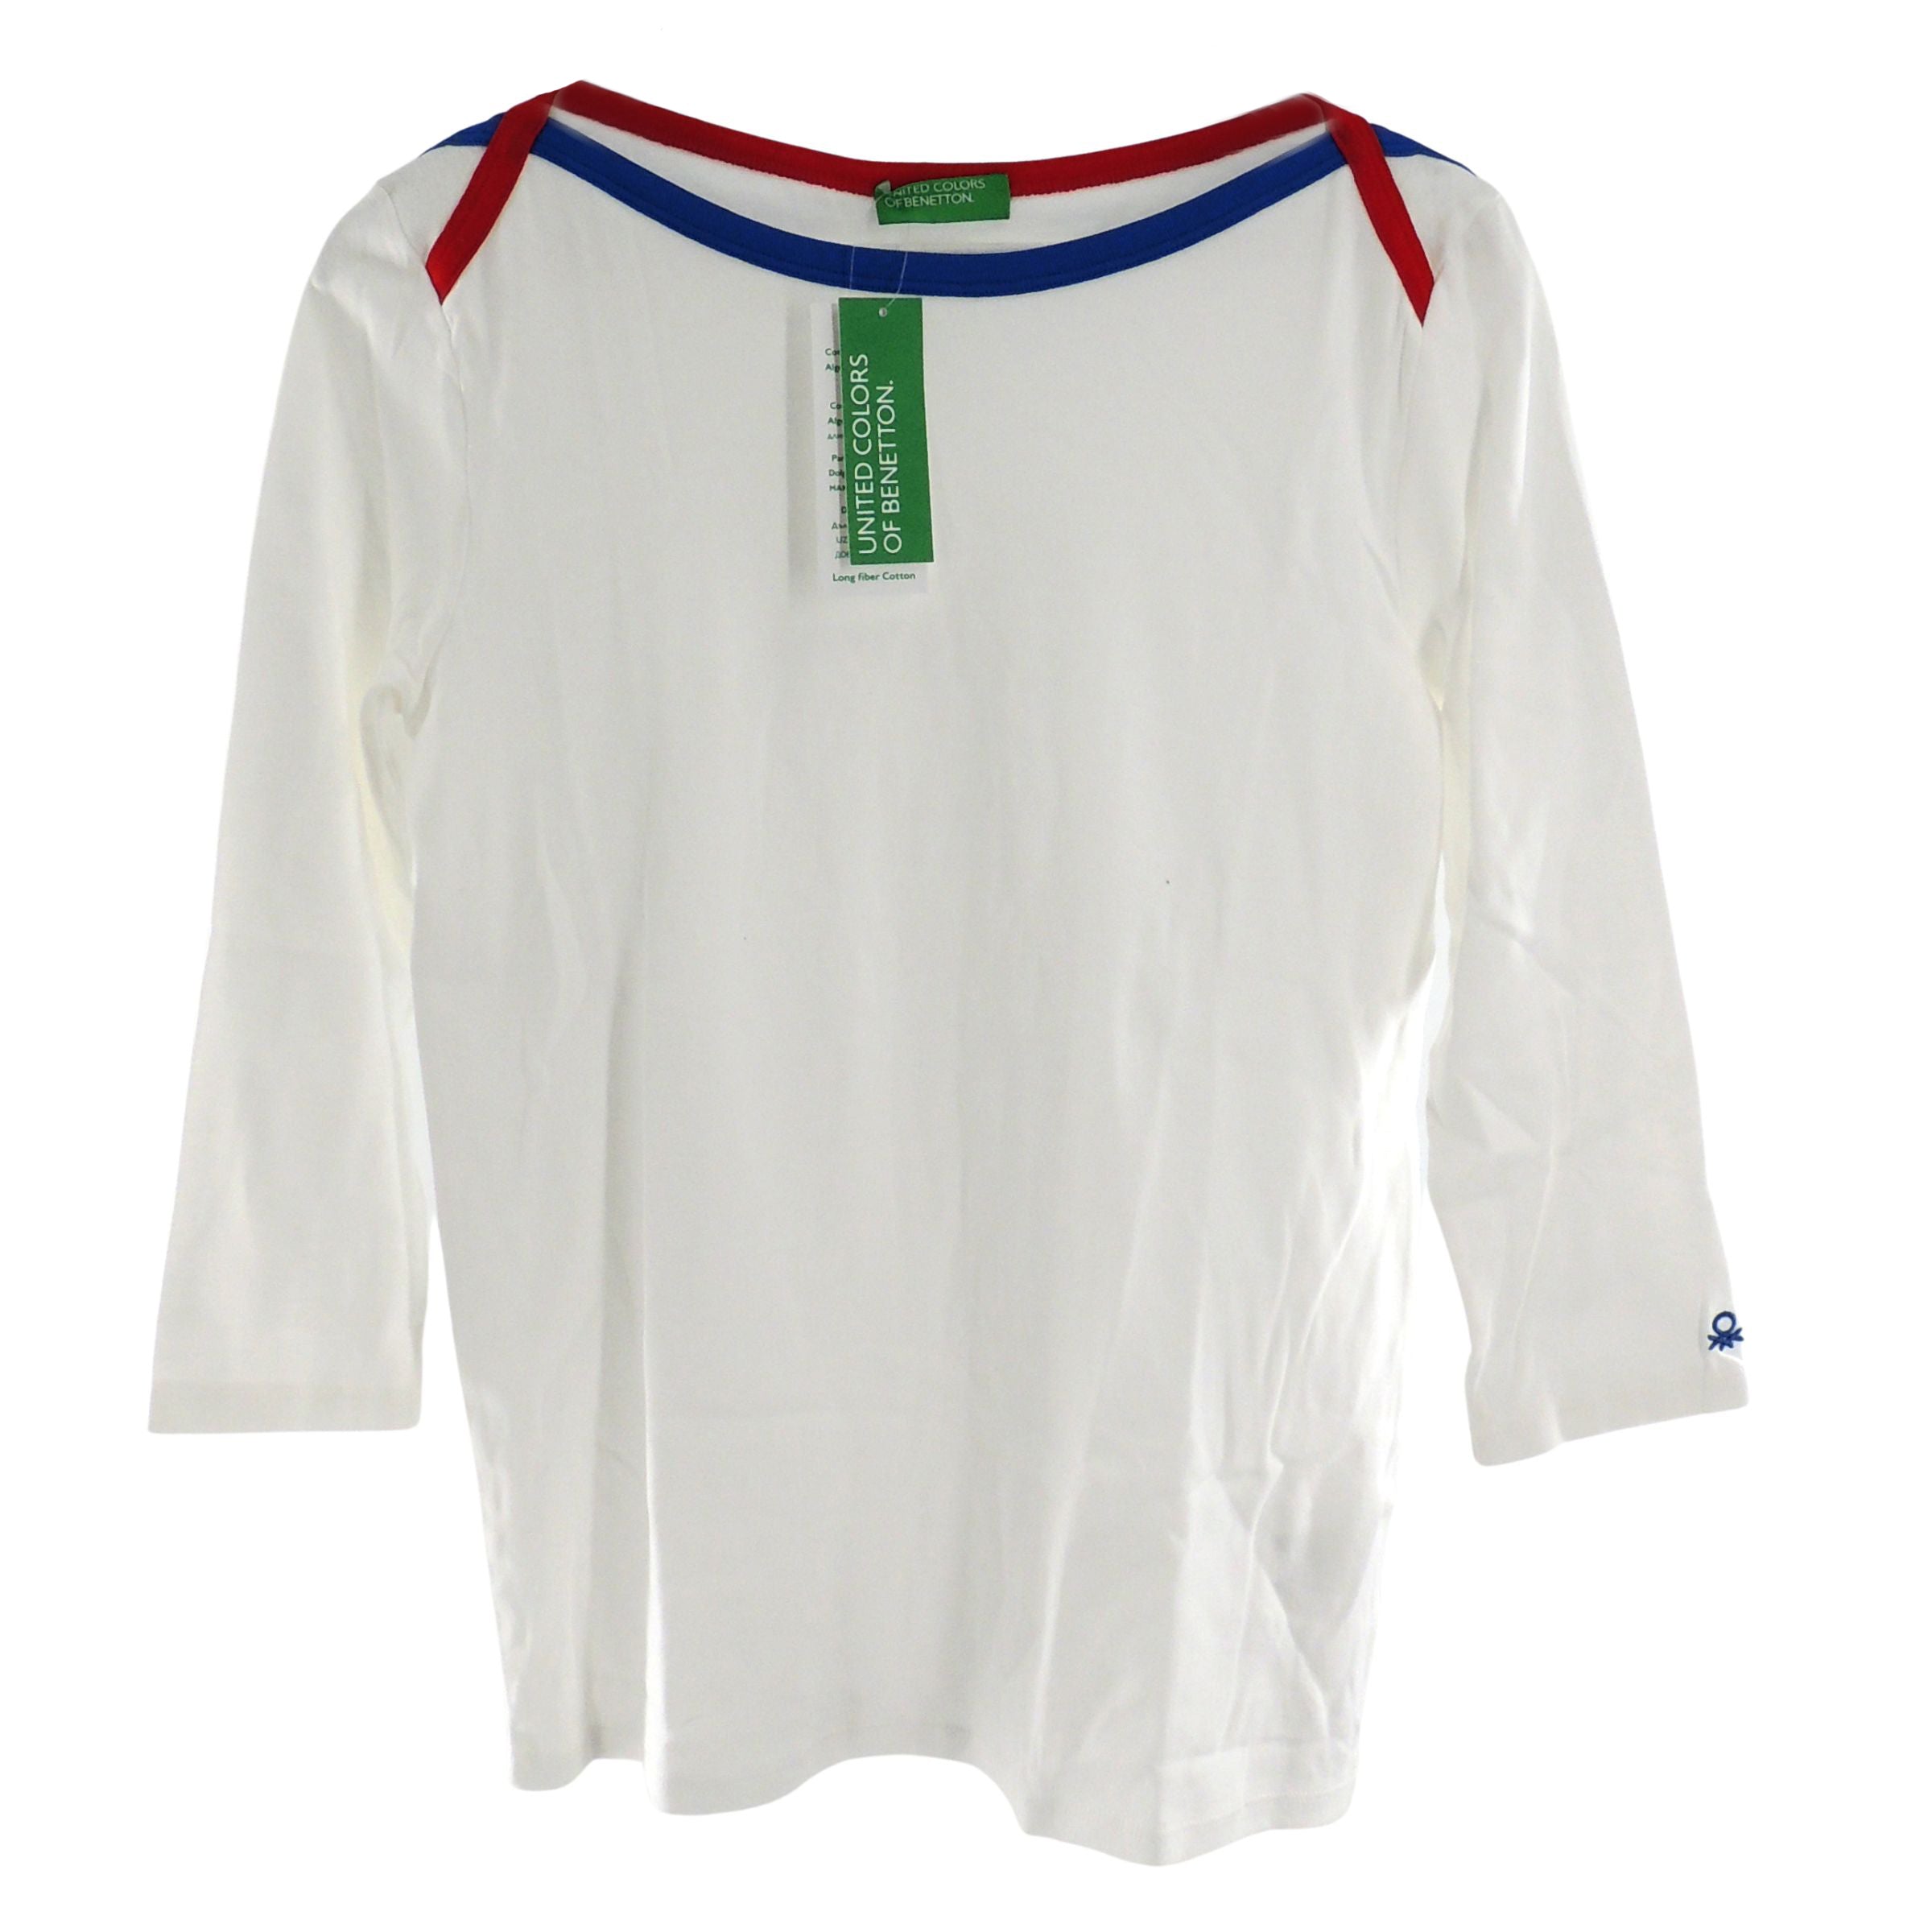 Benetton Long Sleeve Cotton T-Shirt in White Large